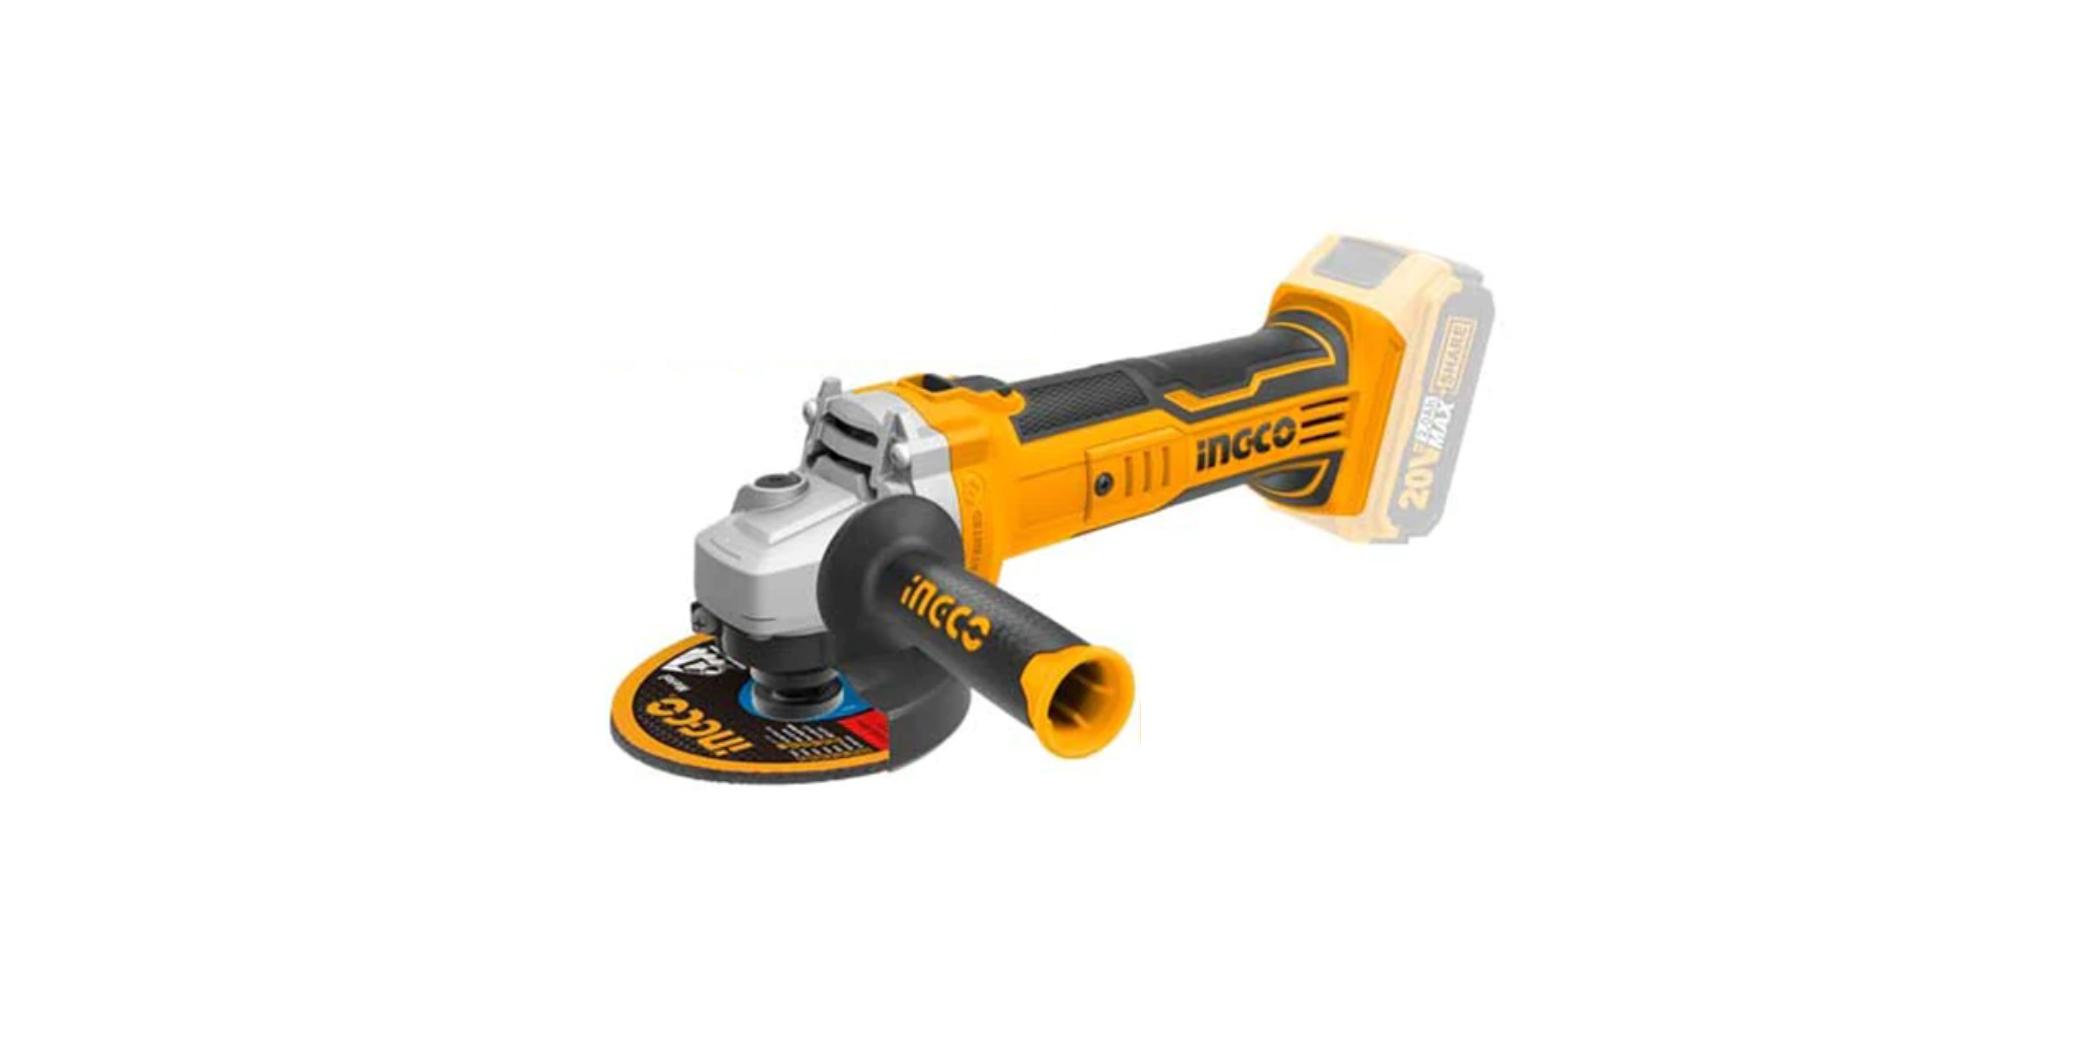 Ingco CAGLI1151 Lithium-Ion Angle Grinder